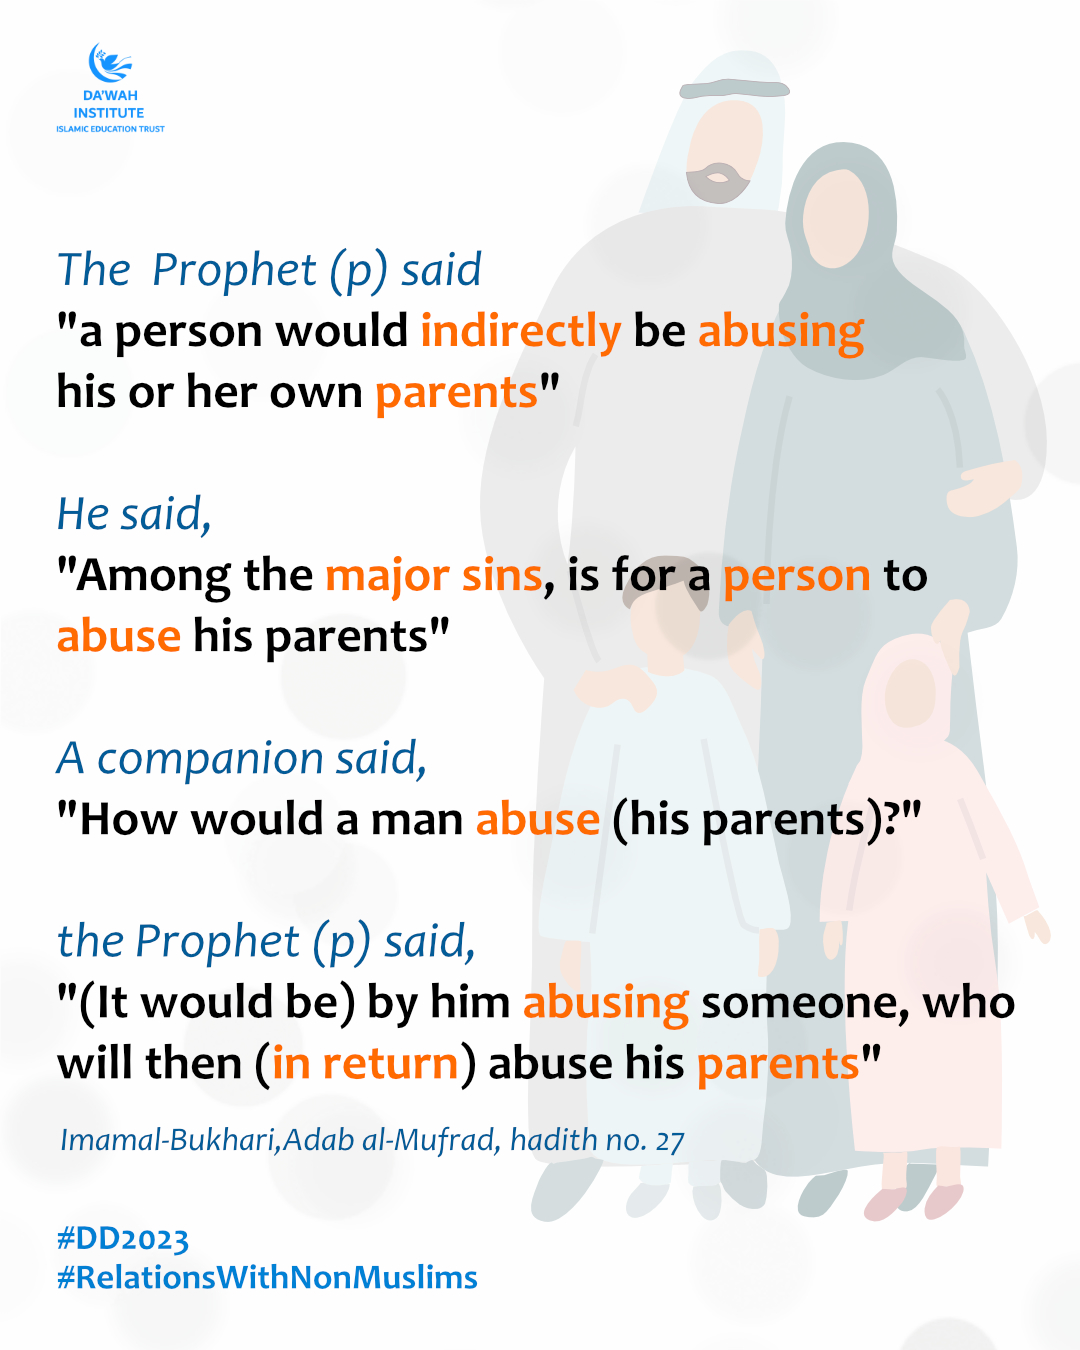 Among the major sins, is for a person to abuse his parents